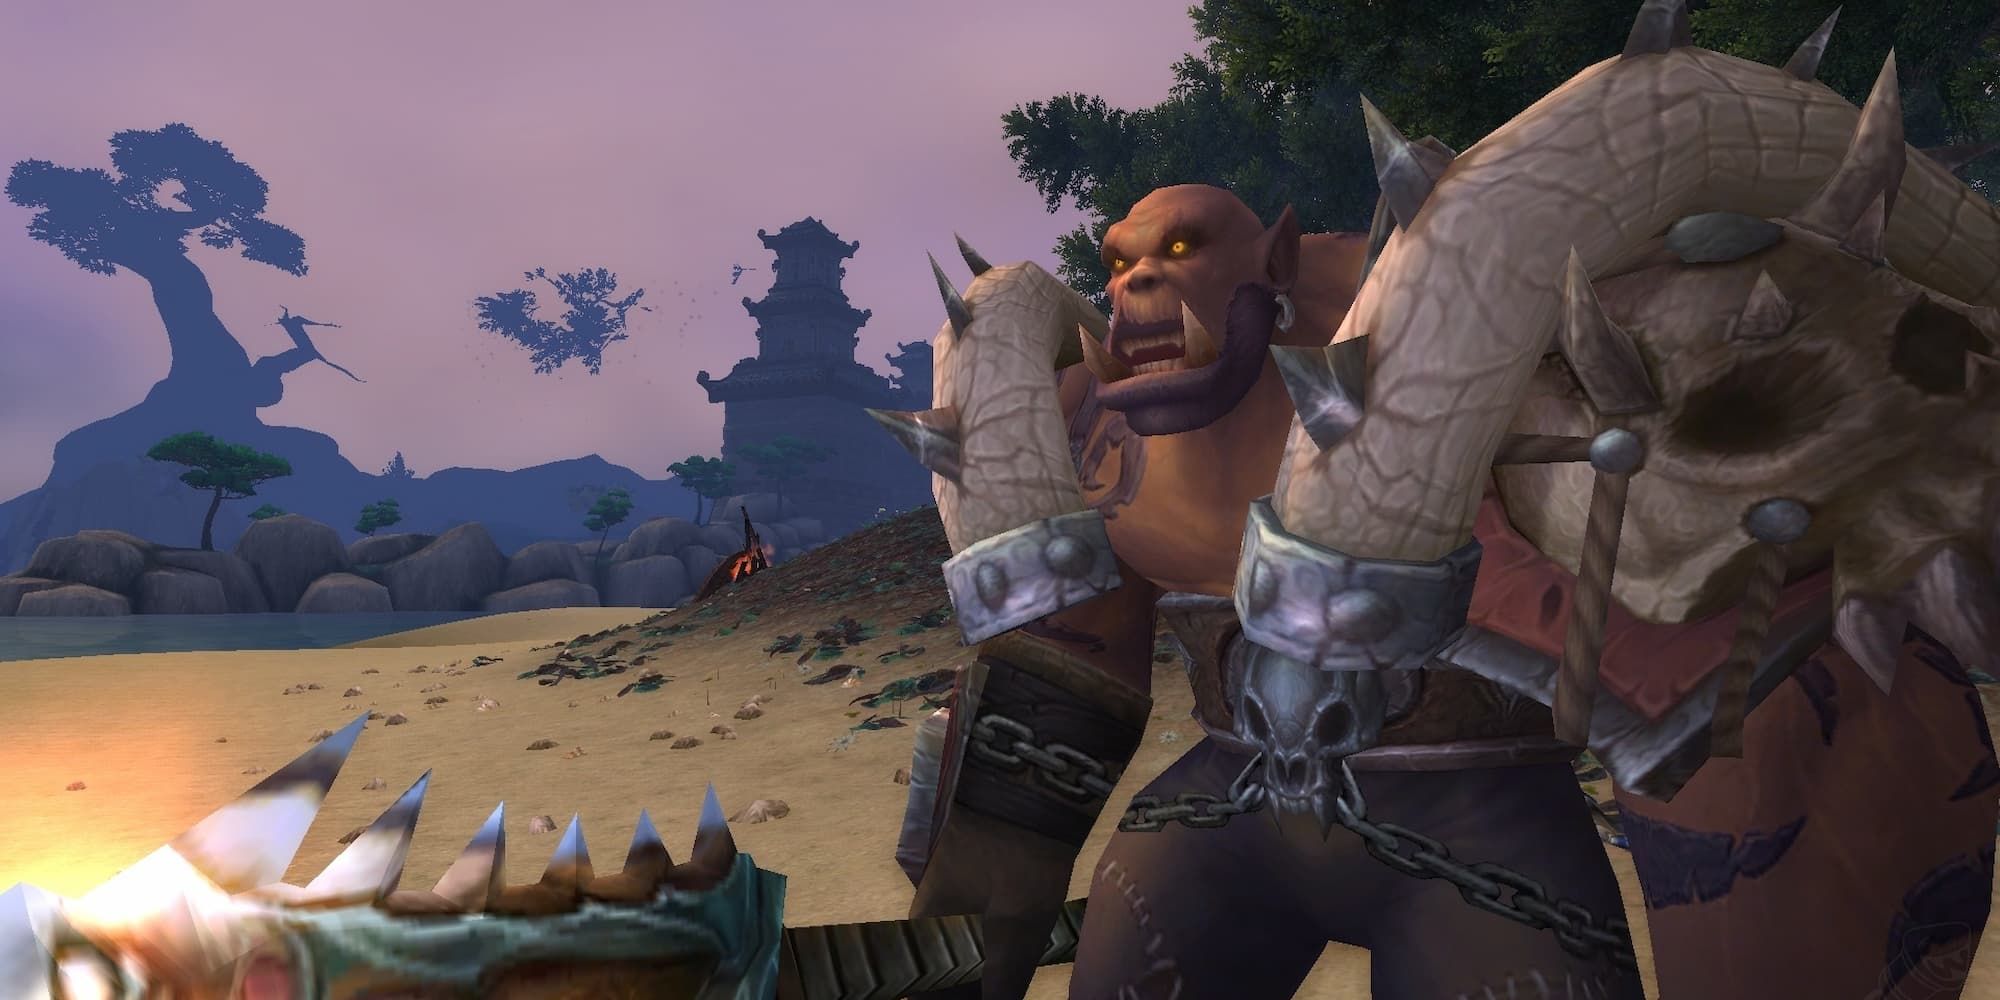 Garrosh Hellscream stands on a beach with his weapon, looking menacingly.